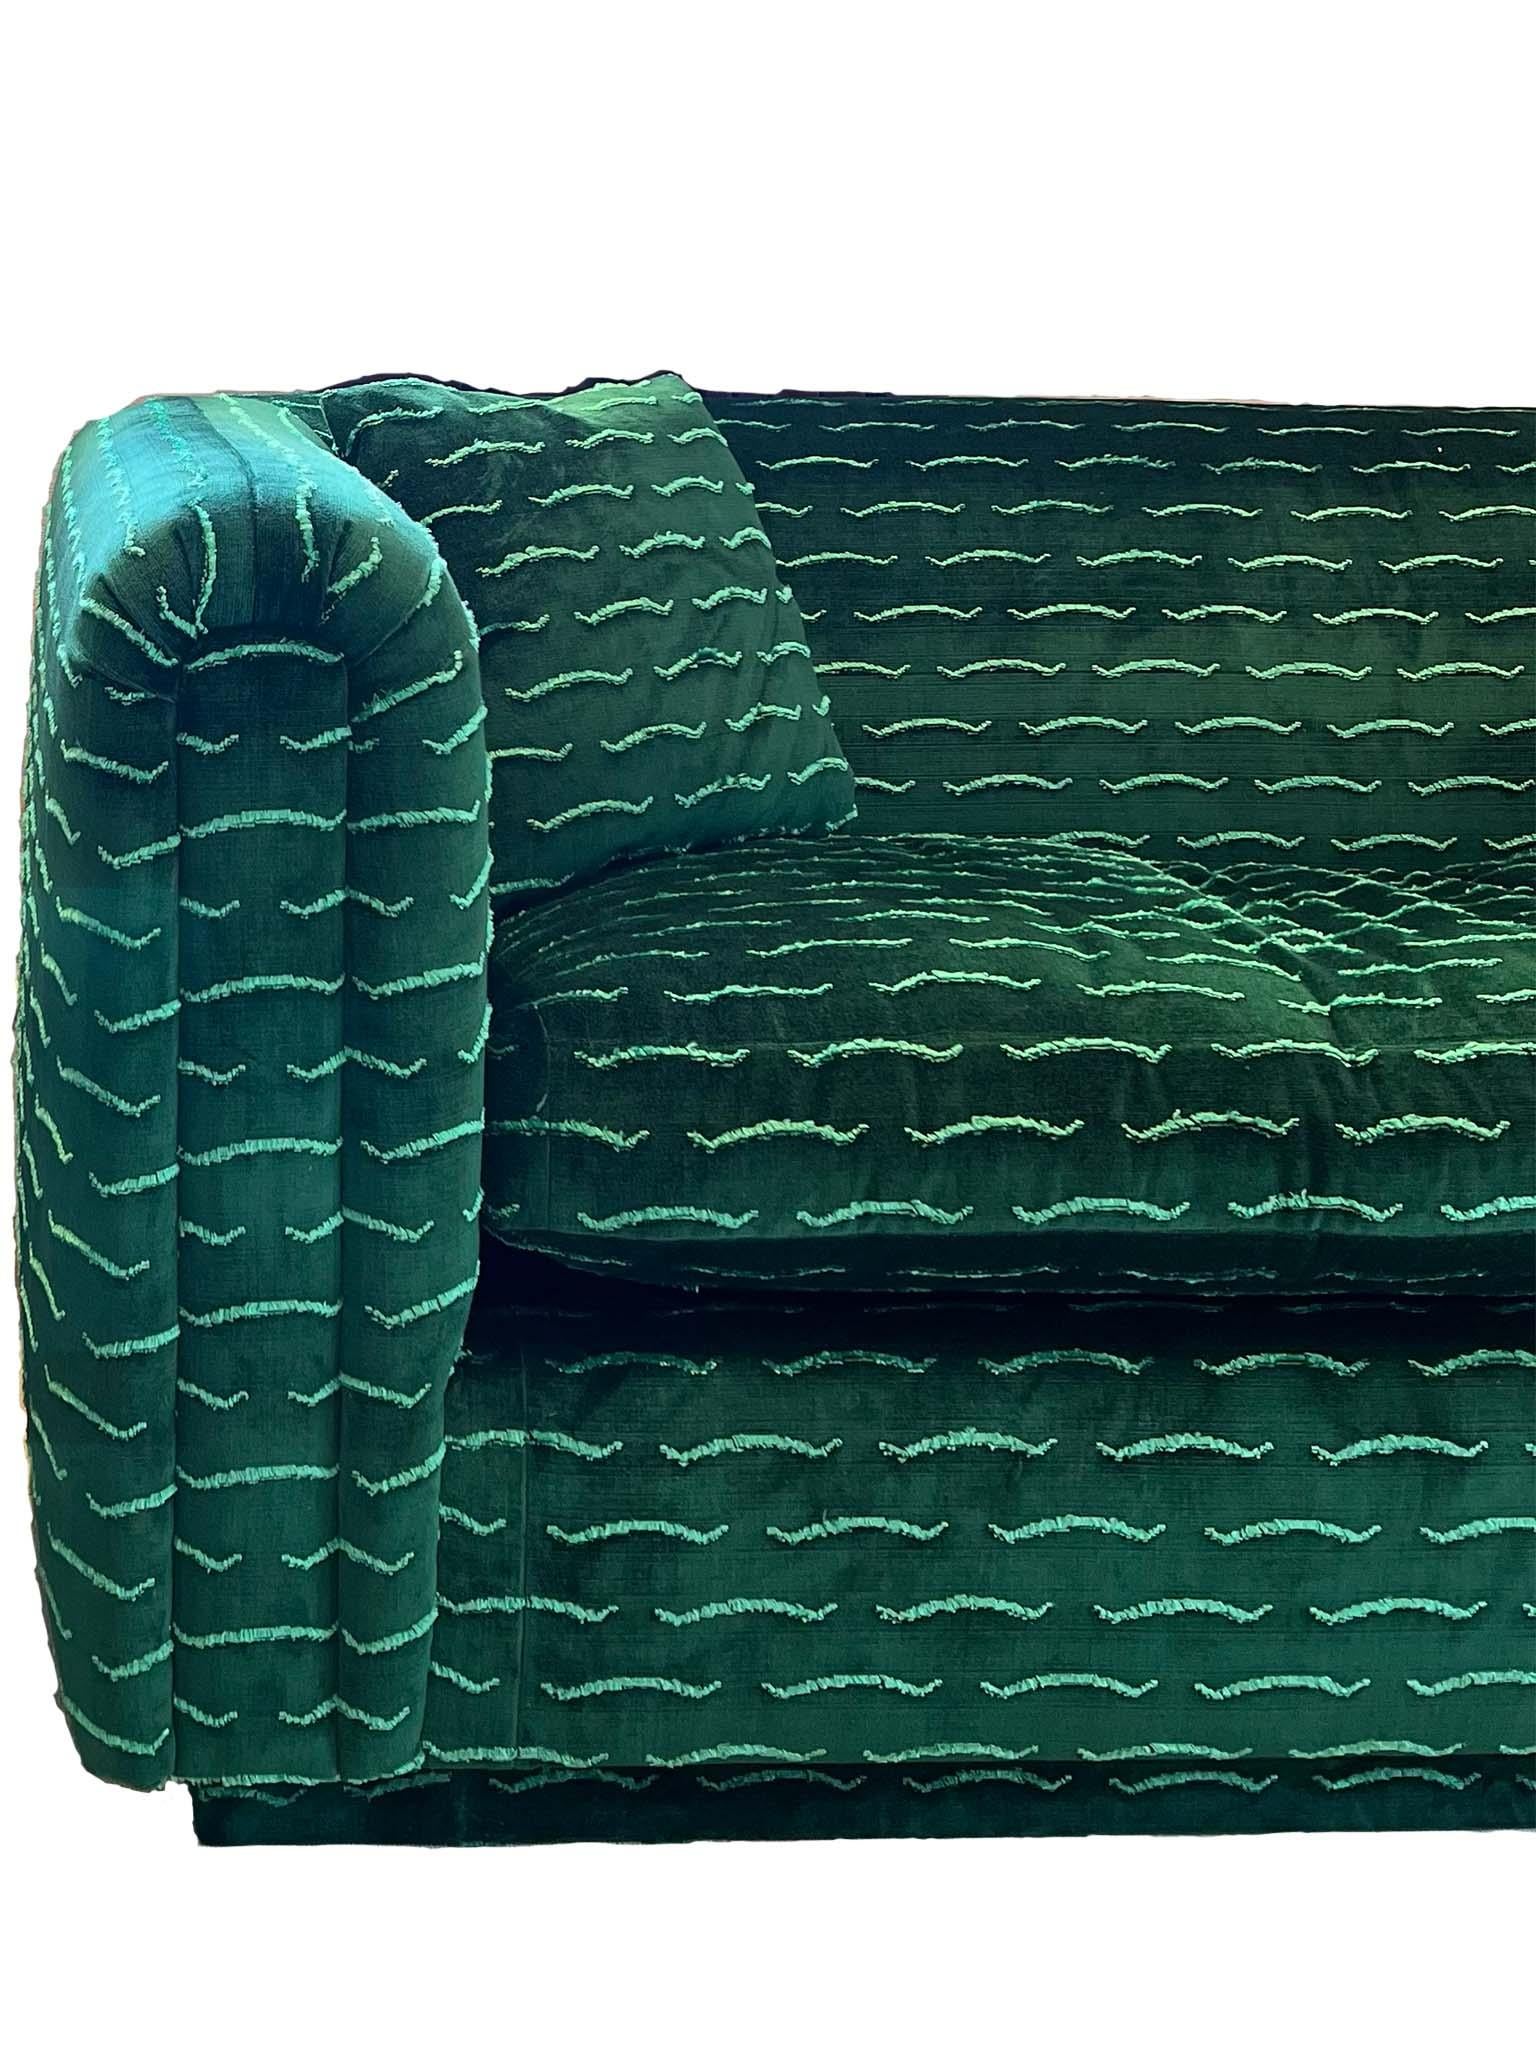 Charming custom made mid-century style settee in Dedar Milano fabric Nouvelles Vagues. Crafted with comfort and style in mind, this couch is a one of a kind piece designed by the team at Cafiero Select. The settee has been custom upholstered in